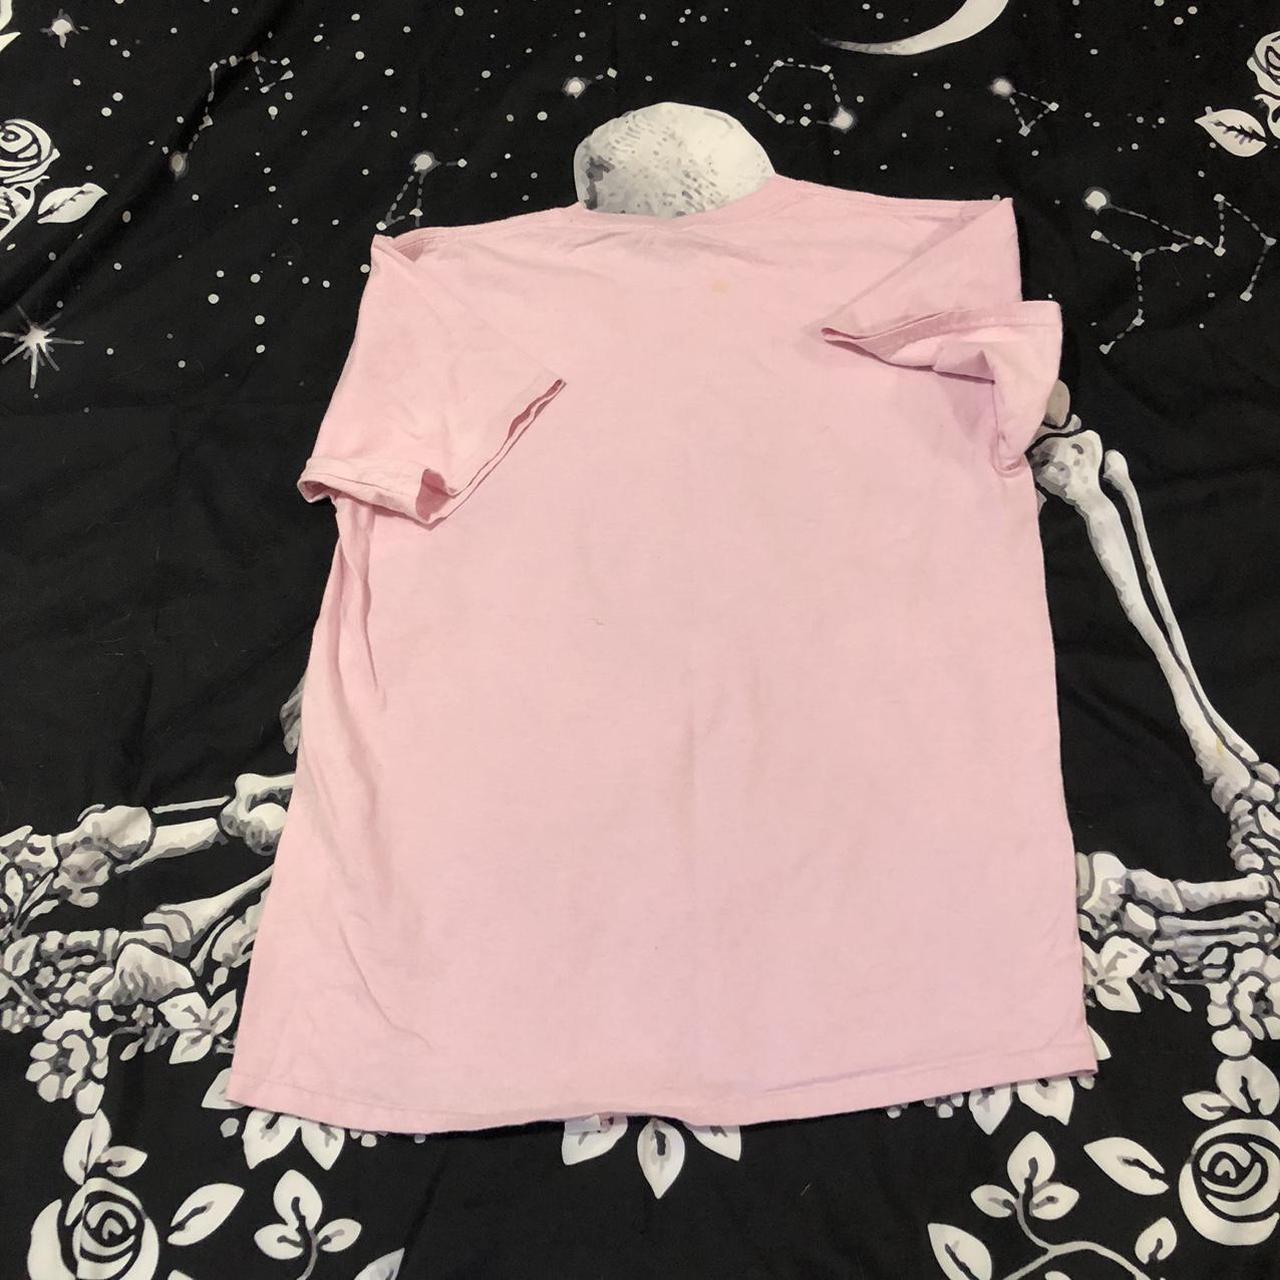 Women's Pink and Green T-shirt (3)